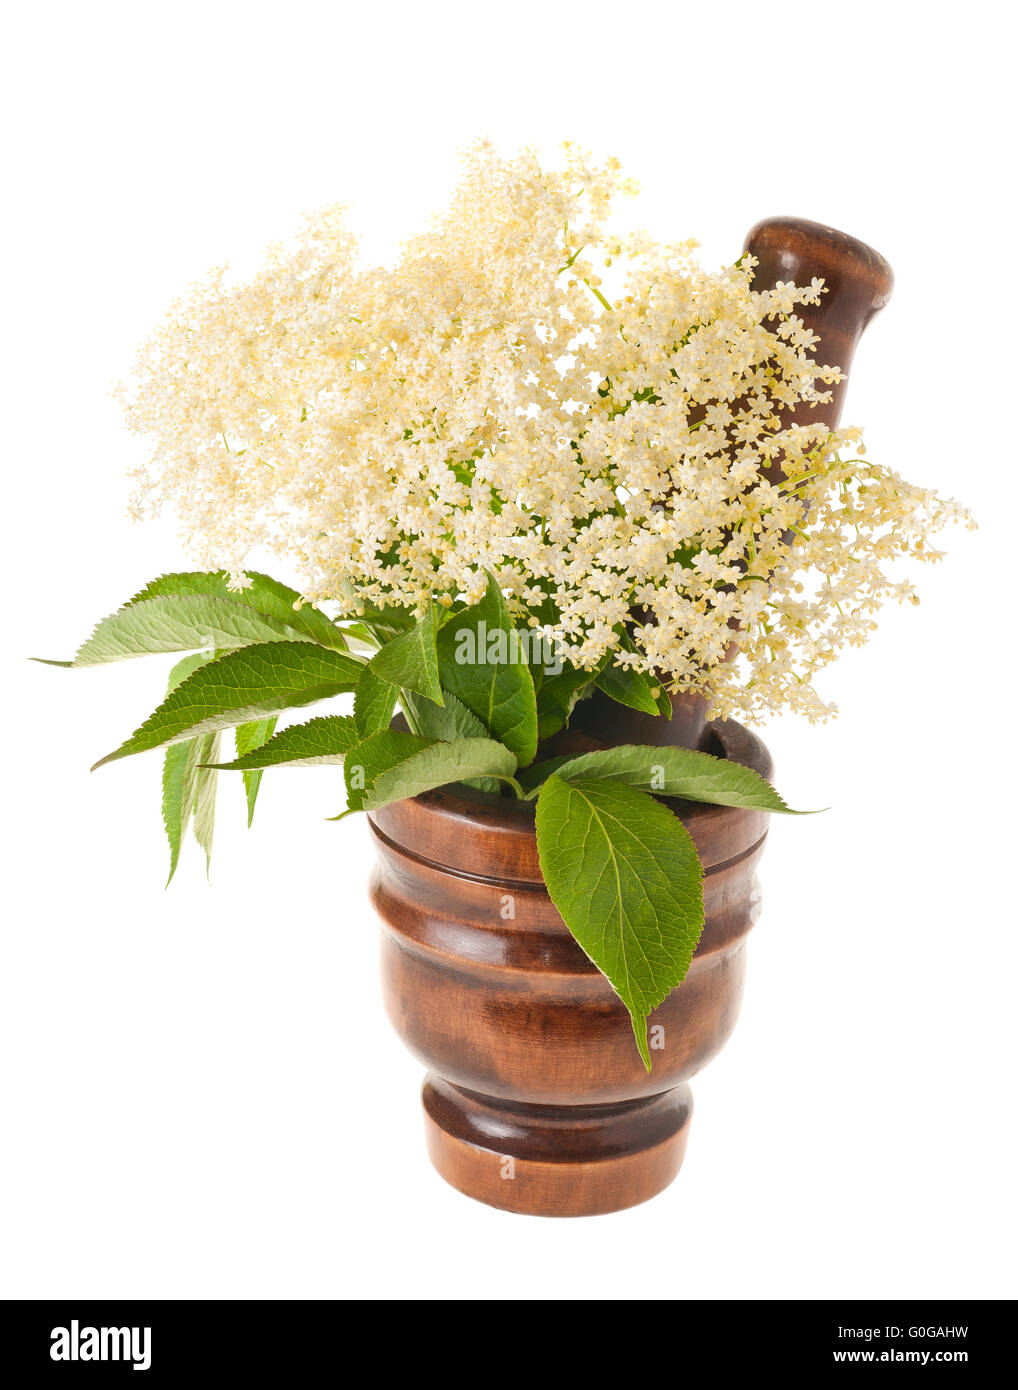 Elder flowers in a mortar isolated on white Stock Photo